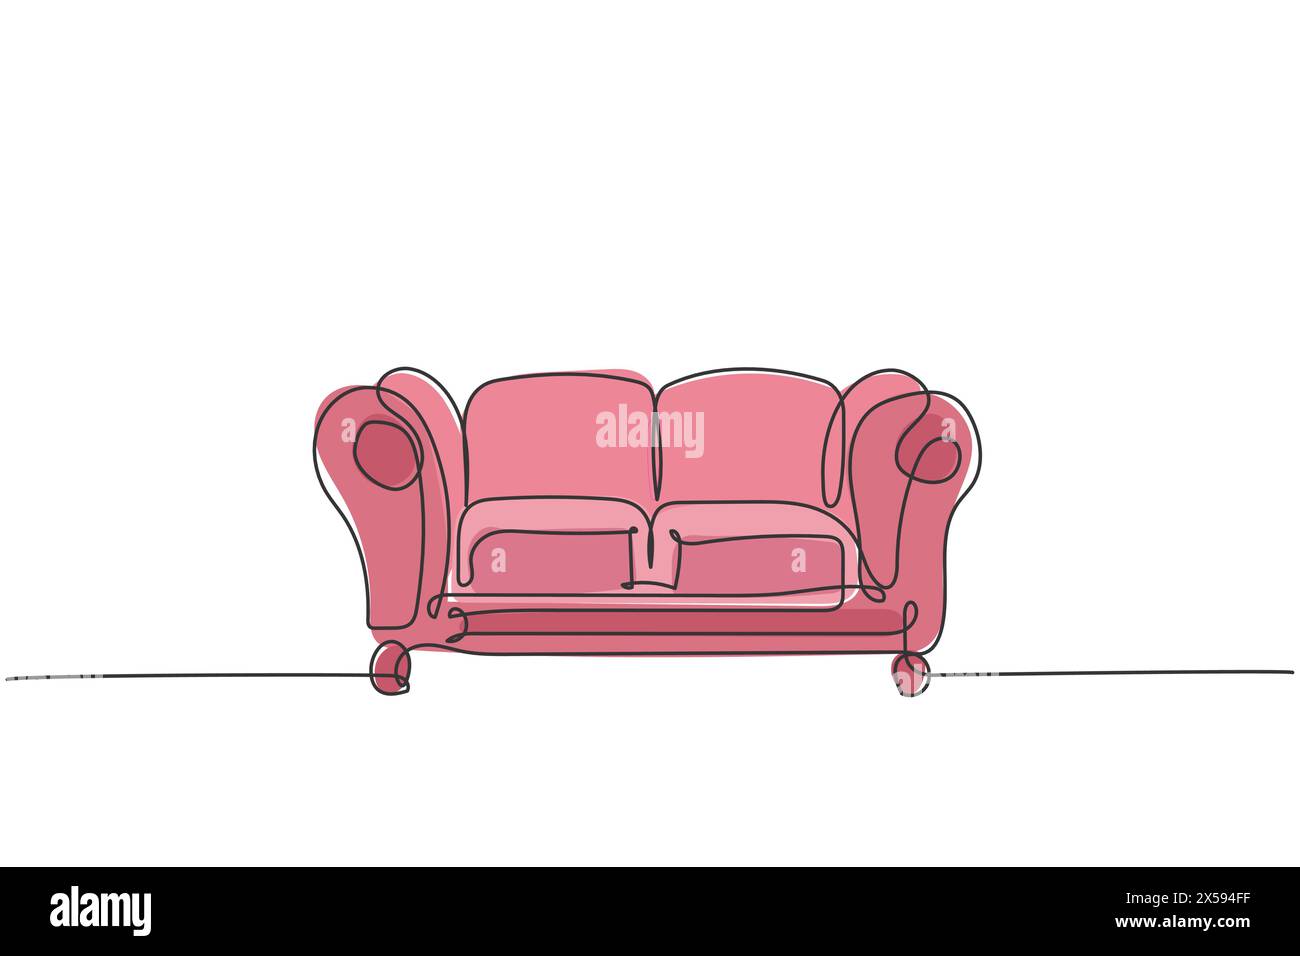 One single line drawing of expensive luxury leather sofa home appliance. Comfortable couch for living room, furniture concept. Dynamic continuous line Stock Vector